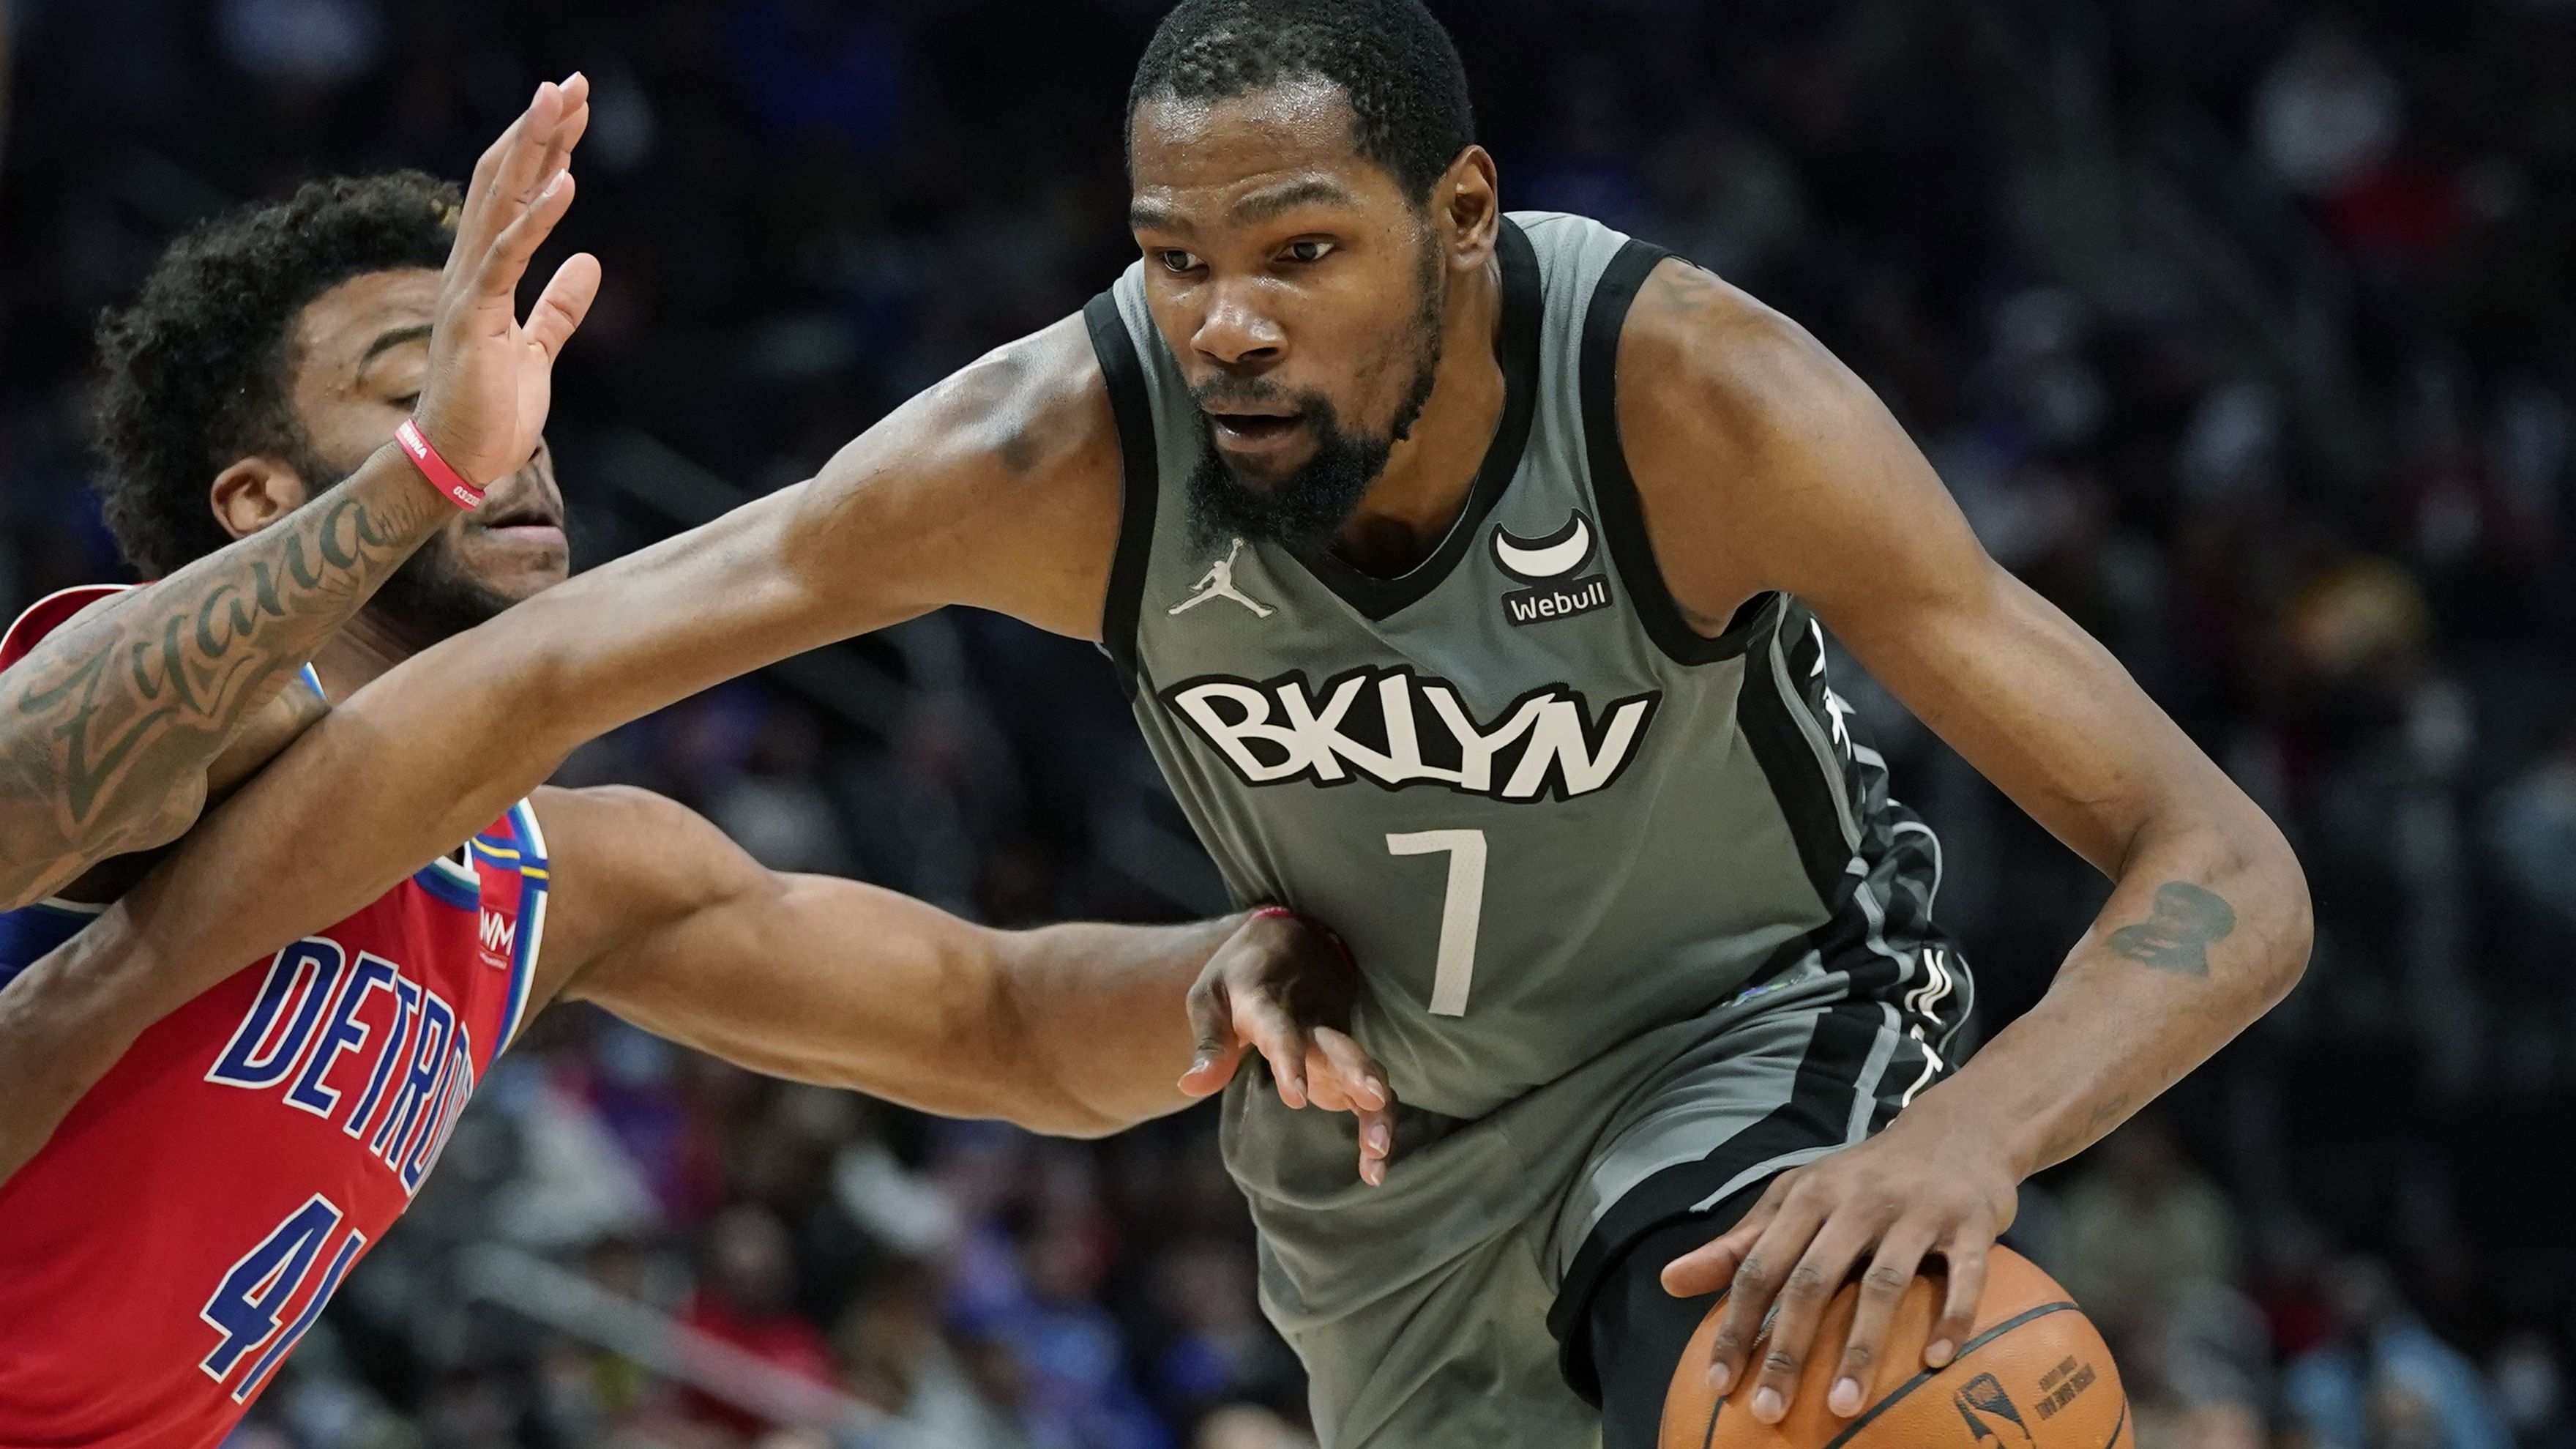 Kevin Durant scores NBA season-high 51 points in Nets' win over Pistons